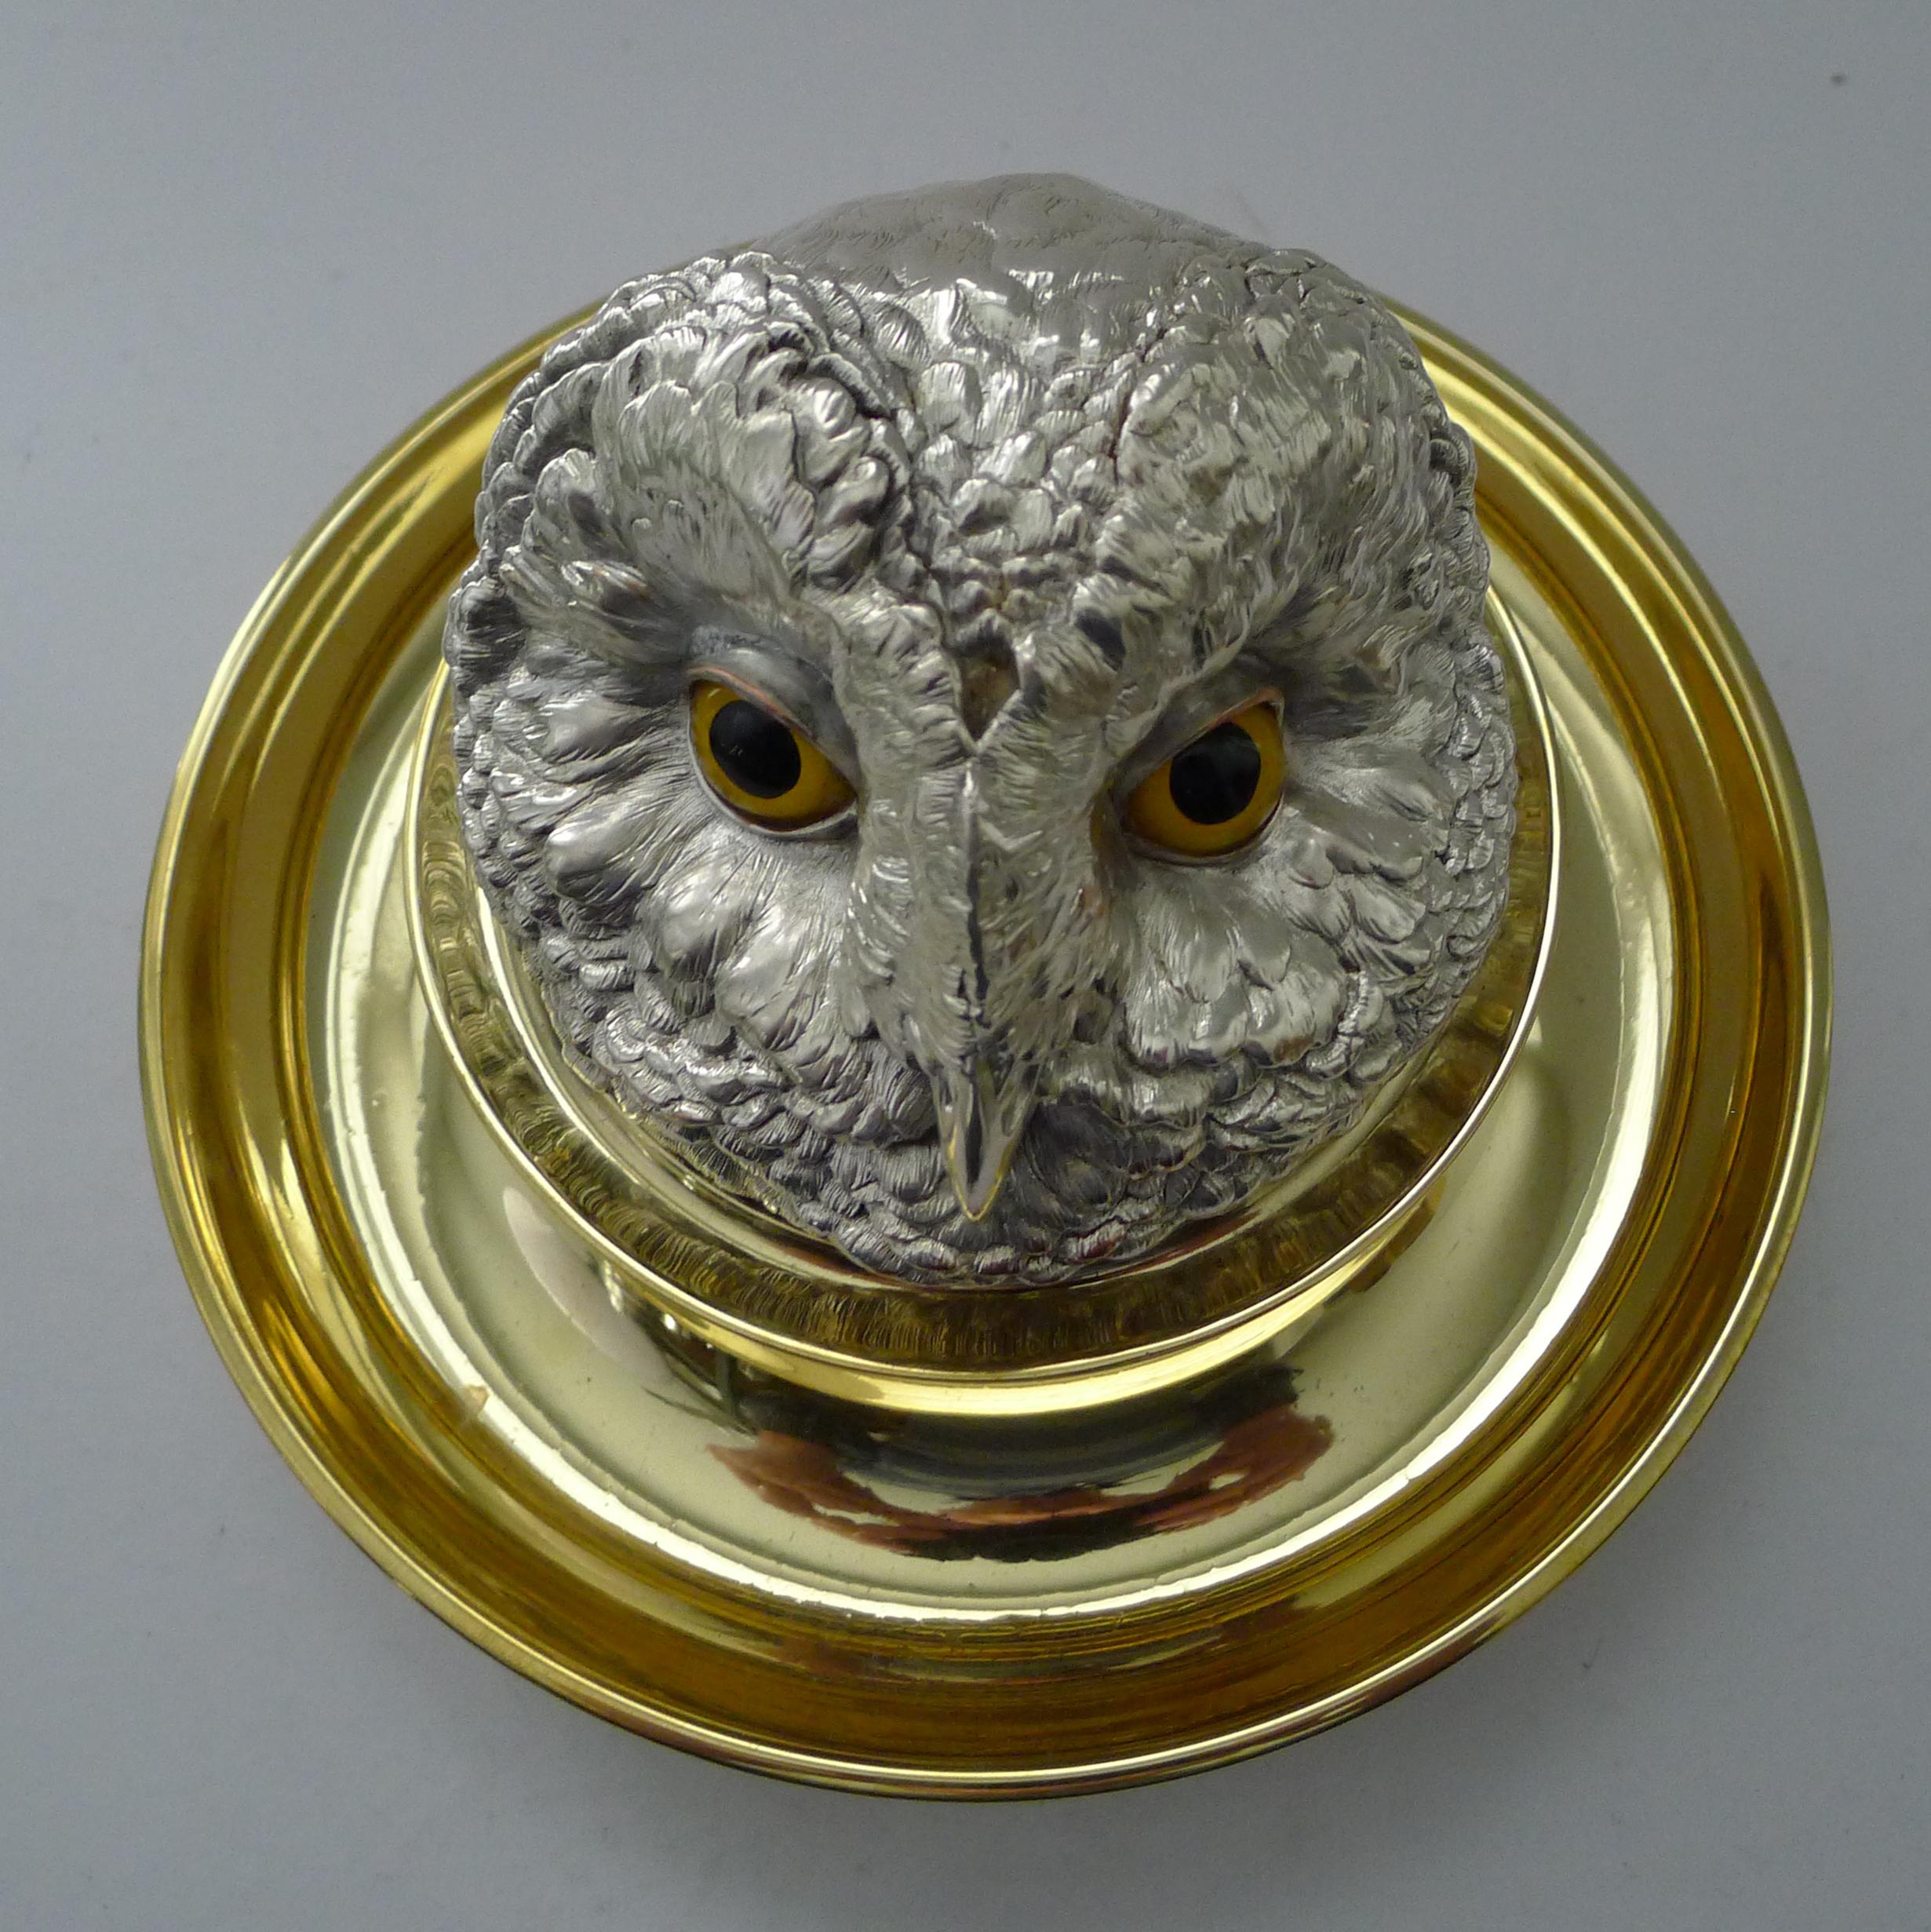 Rare Mammoth English Victorian Novelty Inkwell, Owl with Glass Eyes C.1880 In Good Condition For Sale In Bath, GB